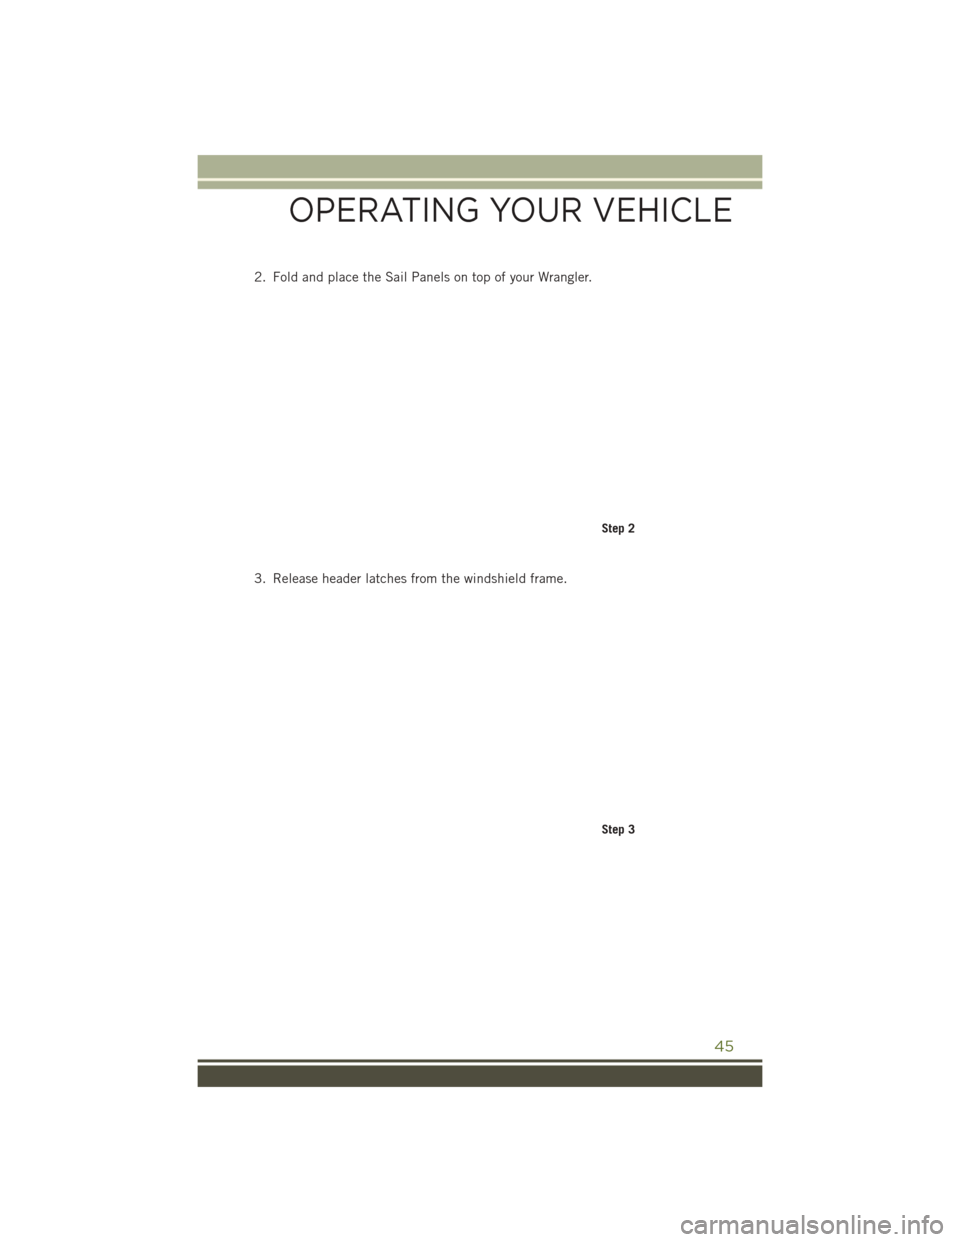 JEEP WRANGLER 2016 JK / 3.G Service Manual 2. Fold and place the Sail Panels on top of your Wrangler.
3. Release header latches from the windshield frame.
Step 2
Step 3
OPERATING YOUR VEHICLE
45 